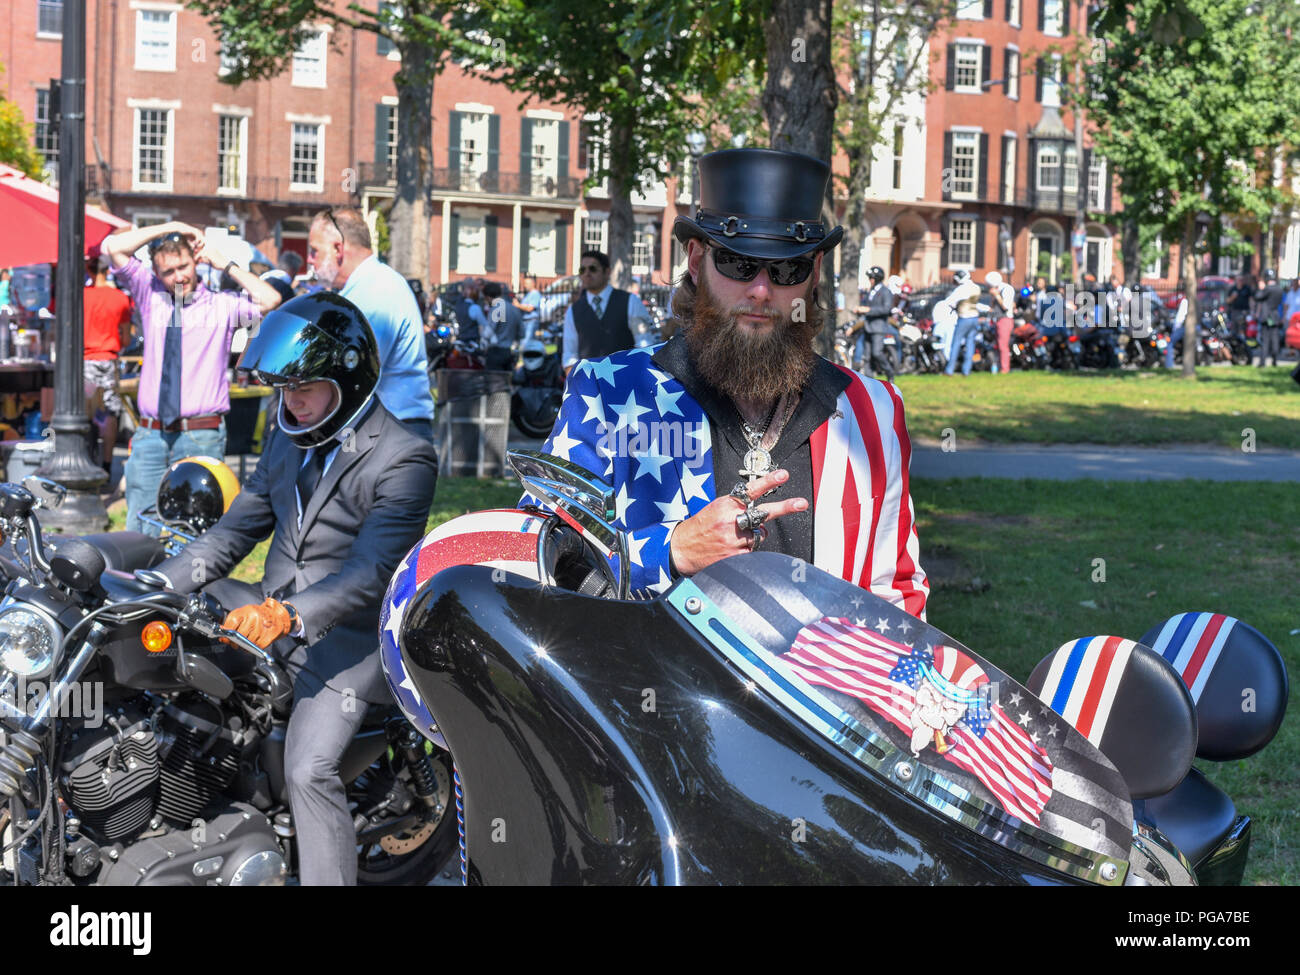 Biker in top hat and Stars and Stripes at Boston Common car show Massachusetts Stock Photo